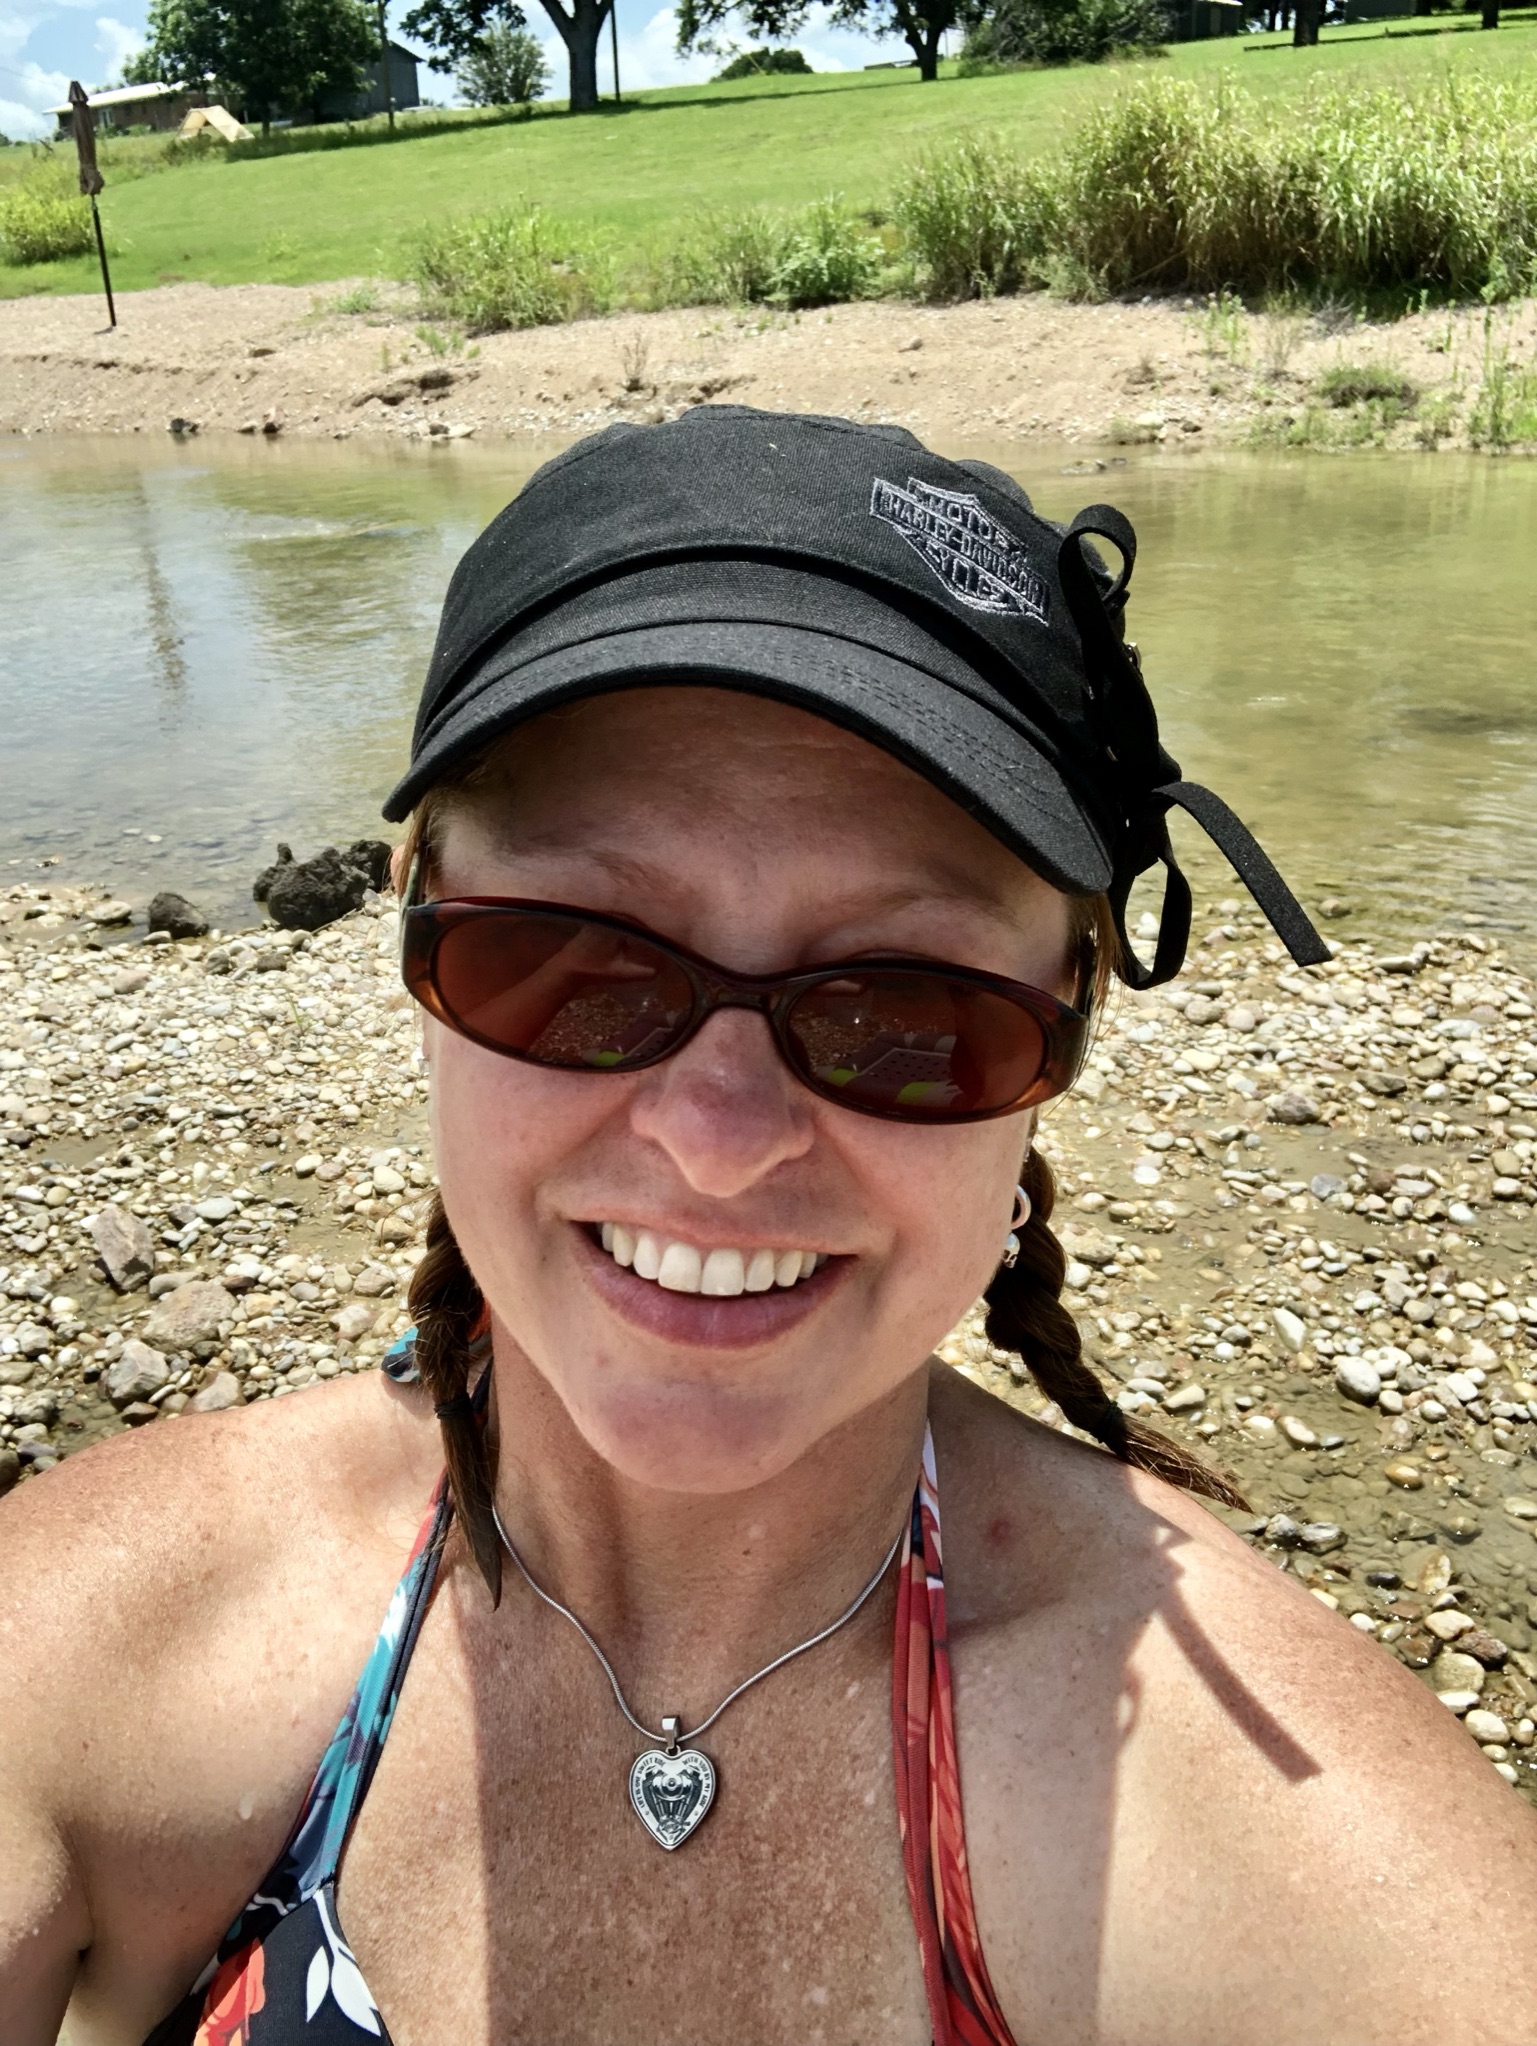 Ros Alainn, Red Head,, hat, sunglasses, standing in a river